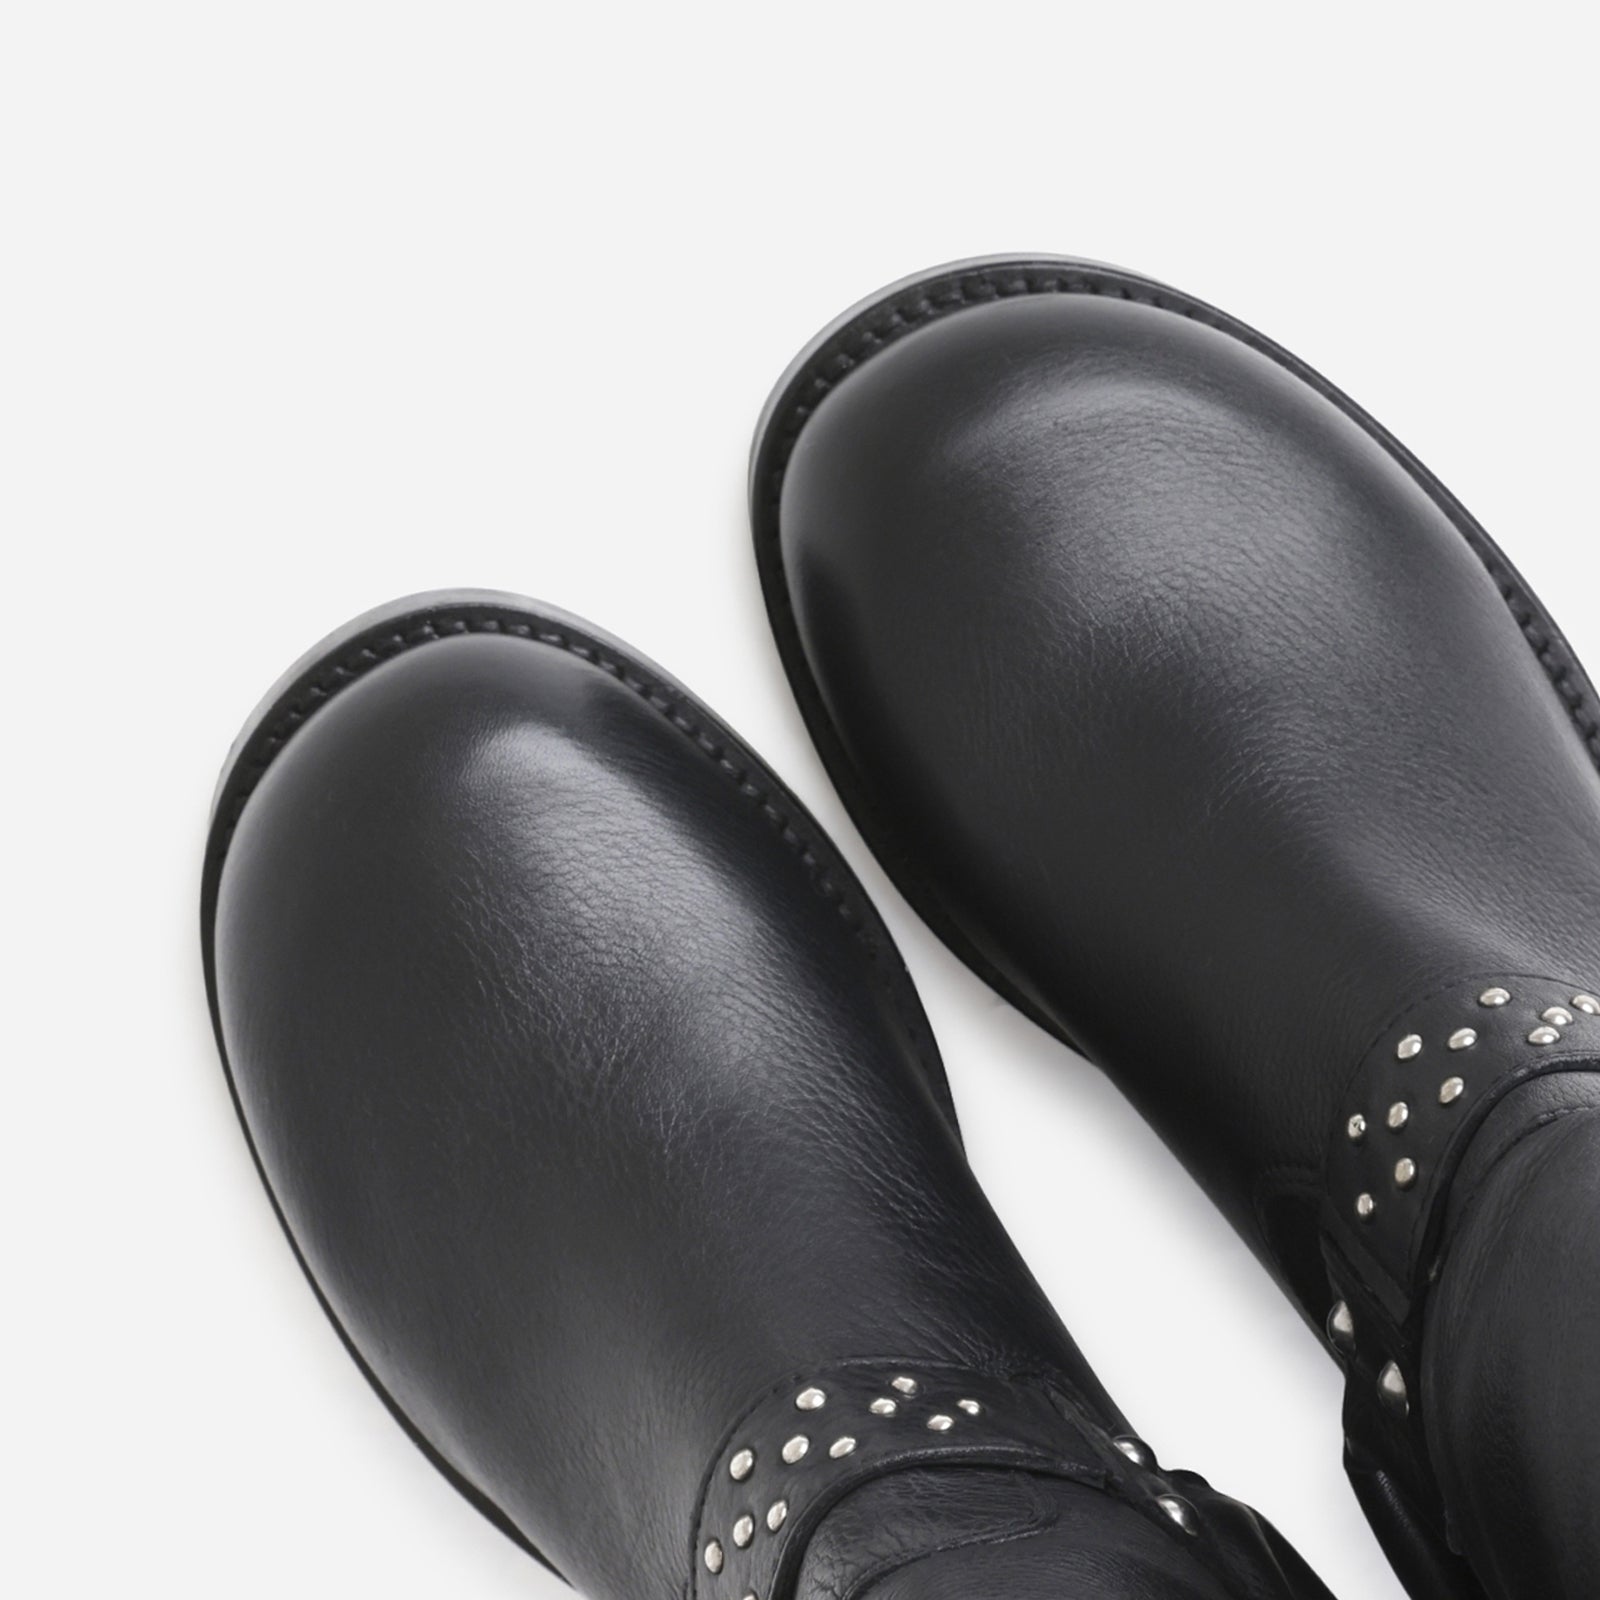 New Camperos studded boots